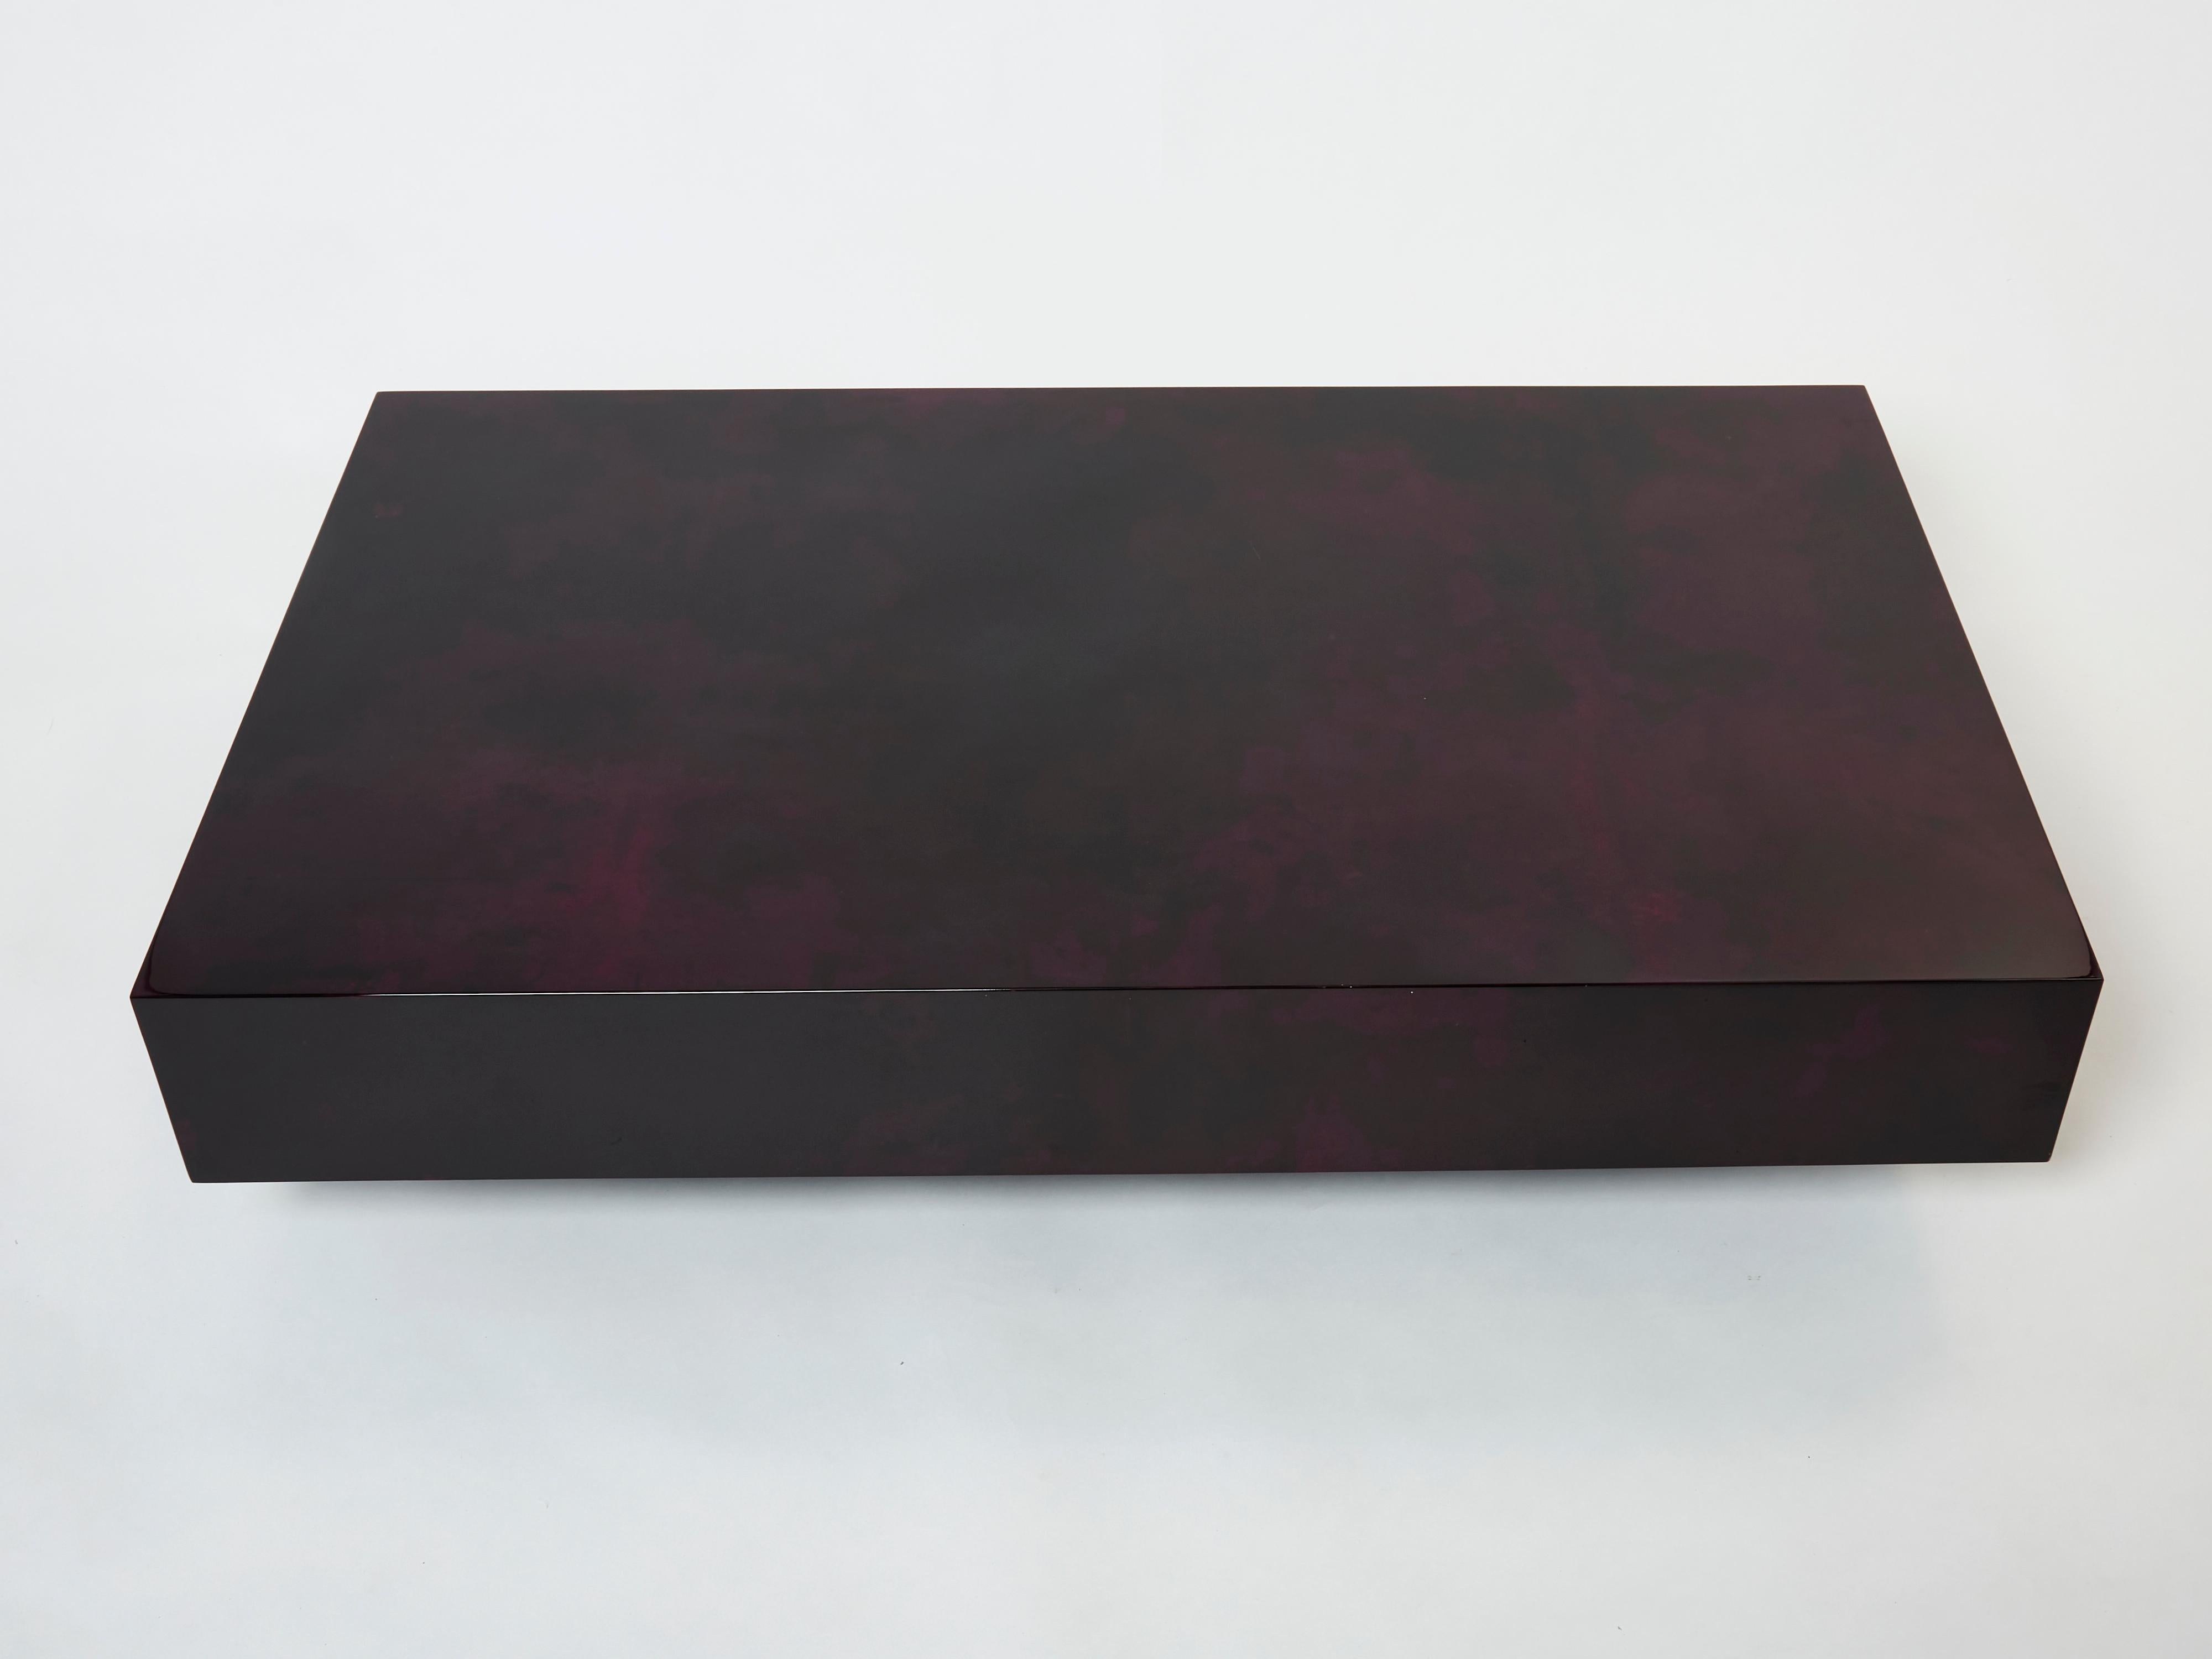 This glossy varnished goatskin parchment, in rich shades of purple and dark purple, makes this beautiful coffee table typical of designer Aldo Tura. It was made in Italy in the late 1960s. This large coffee table would make a fascinating centerpiece